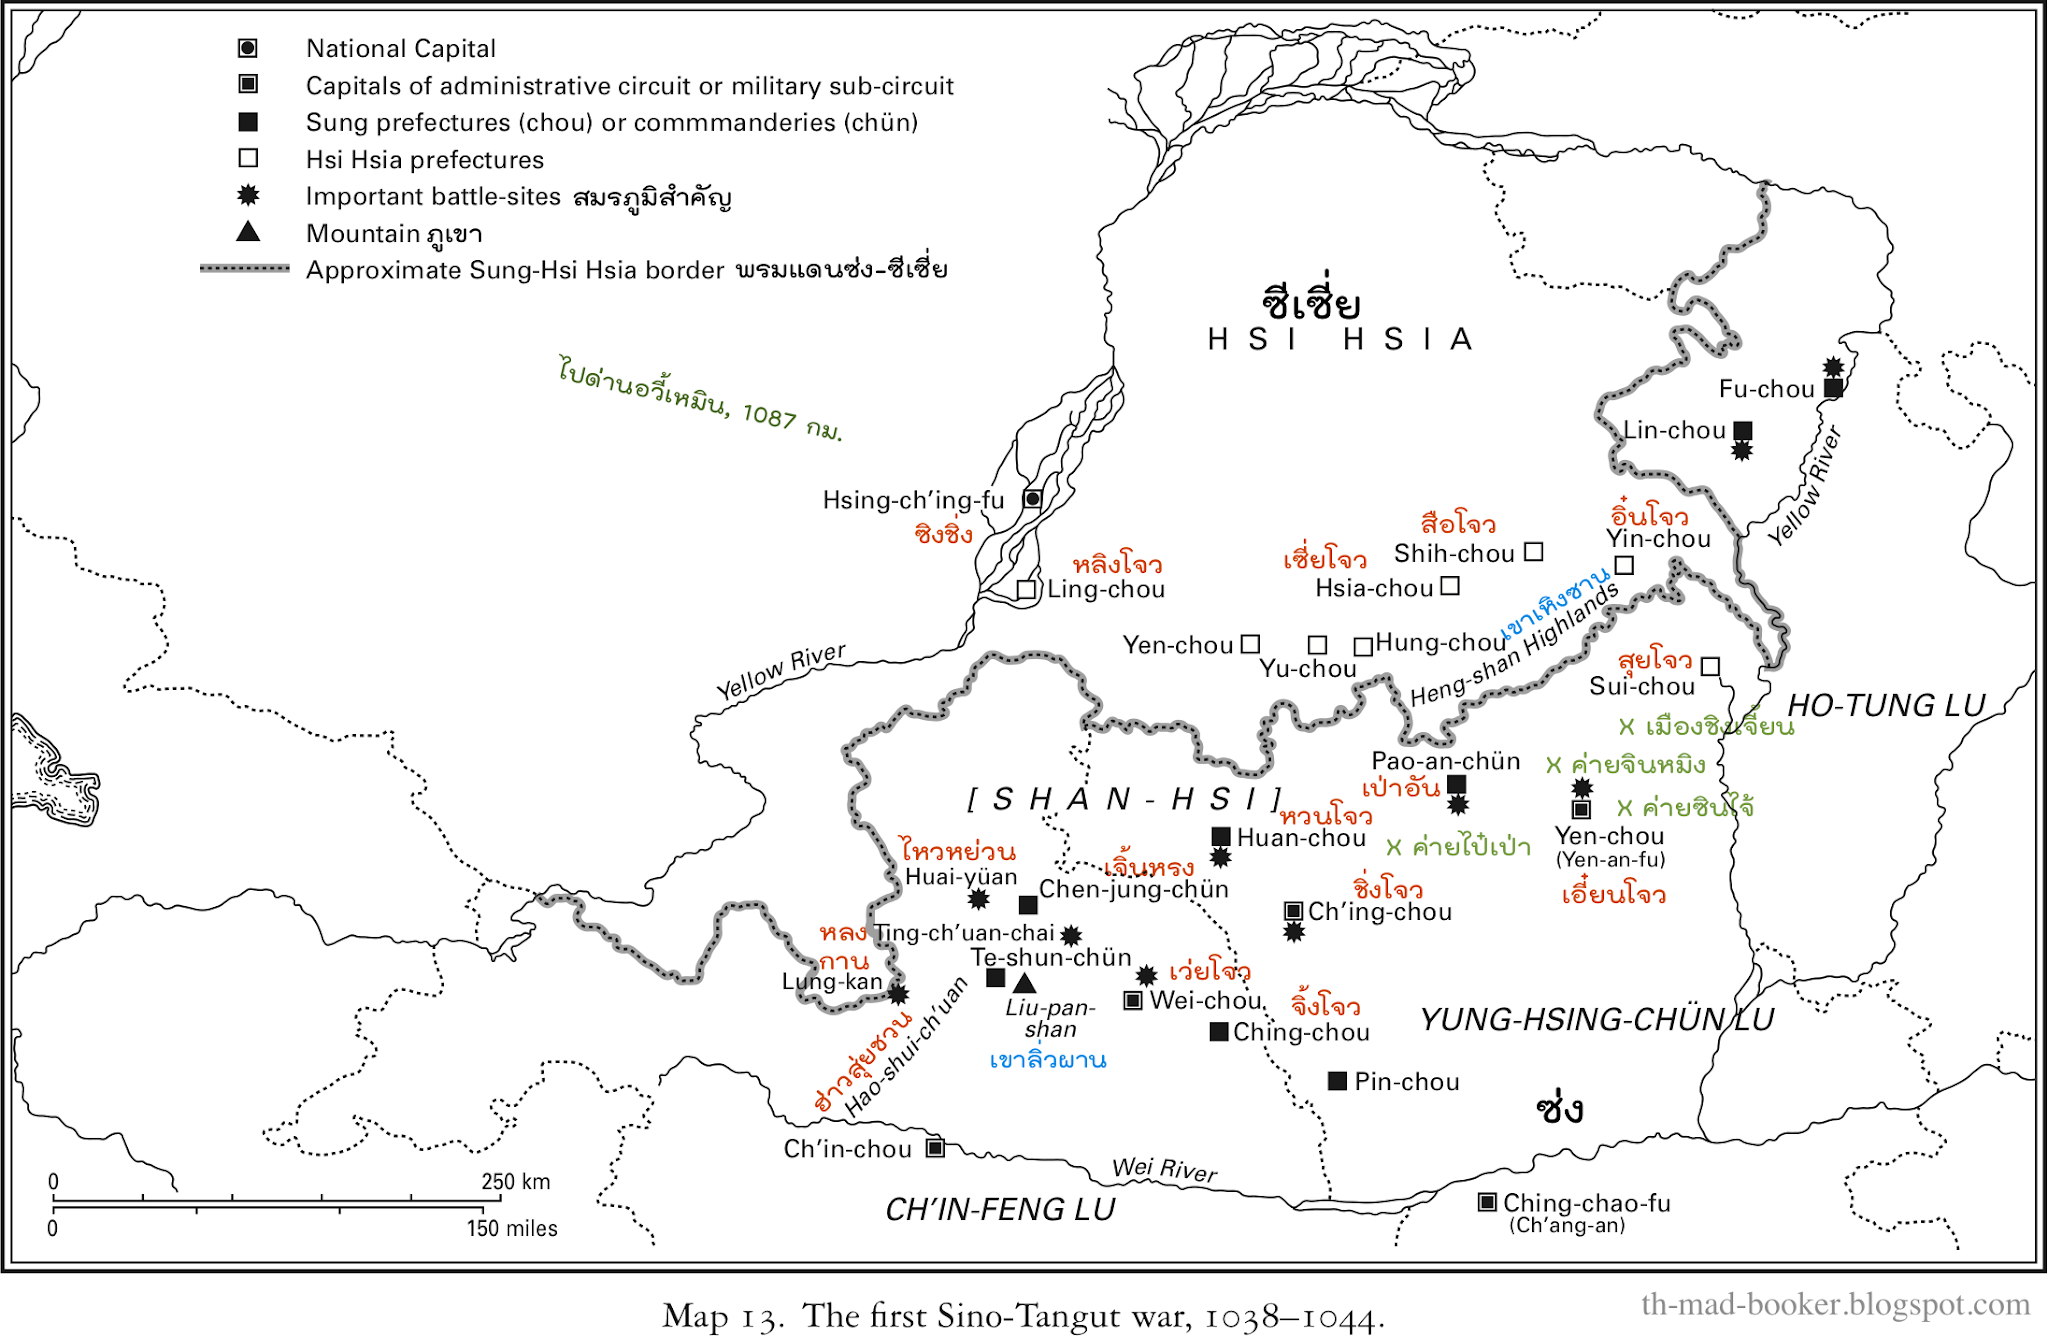 Based on a map in The Cambridge History of China